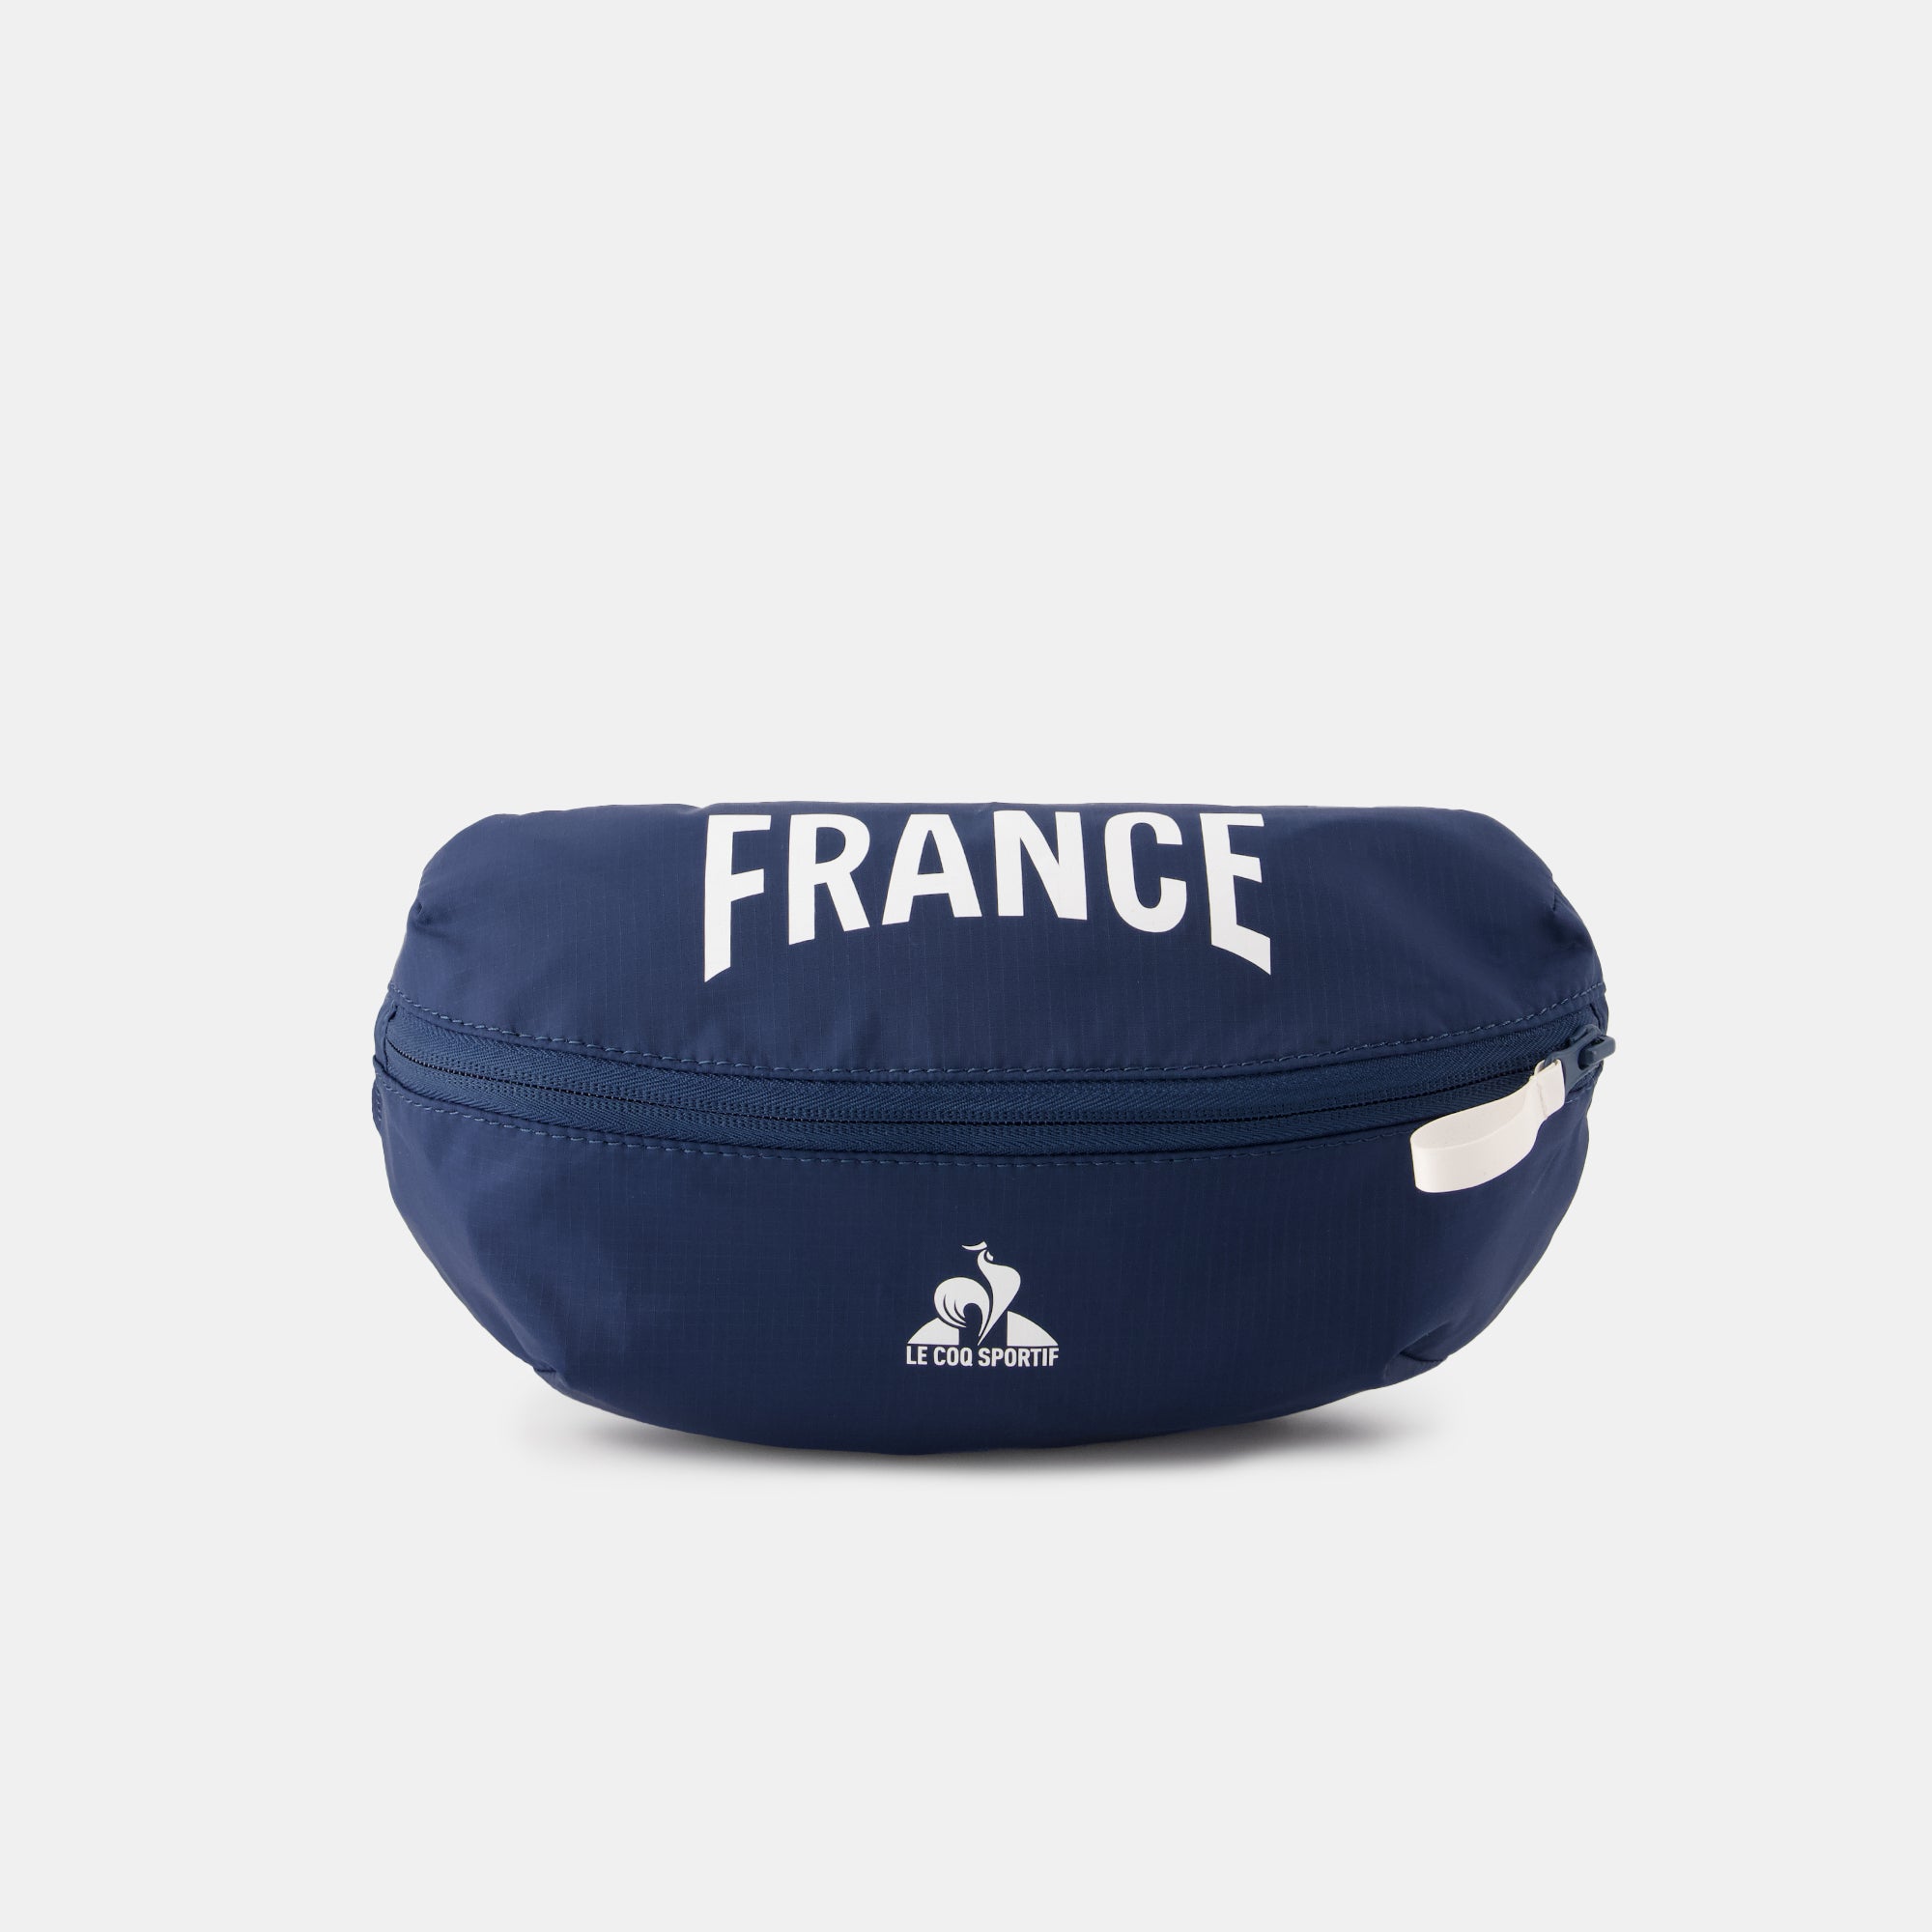 Men's Backpacks and sports bags – Le Coq Sportif